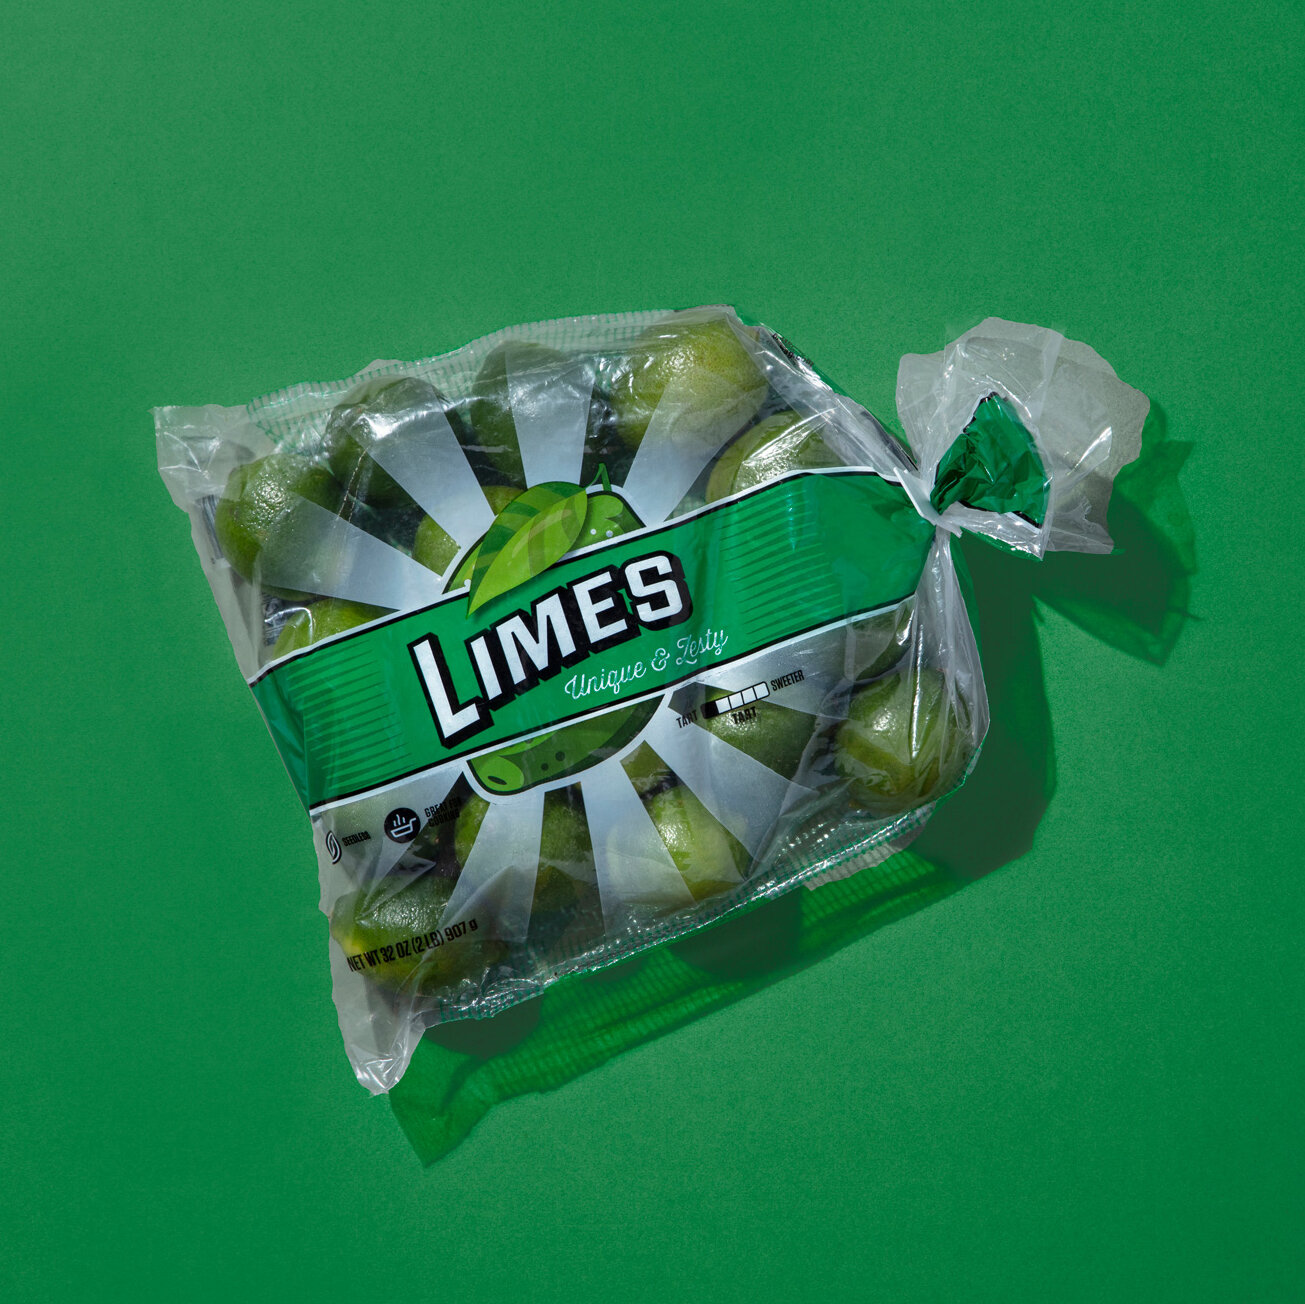 Key lime pie, mojitos, guacamole...Whatever the reason a consumer is purchasing these green beauties, this bag will stand out. It's just one in a series of citrus packages designed for Walmart stores.